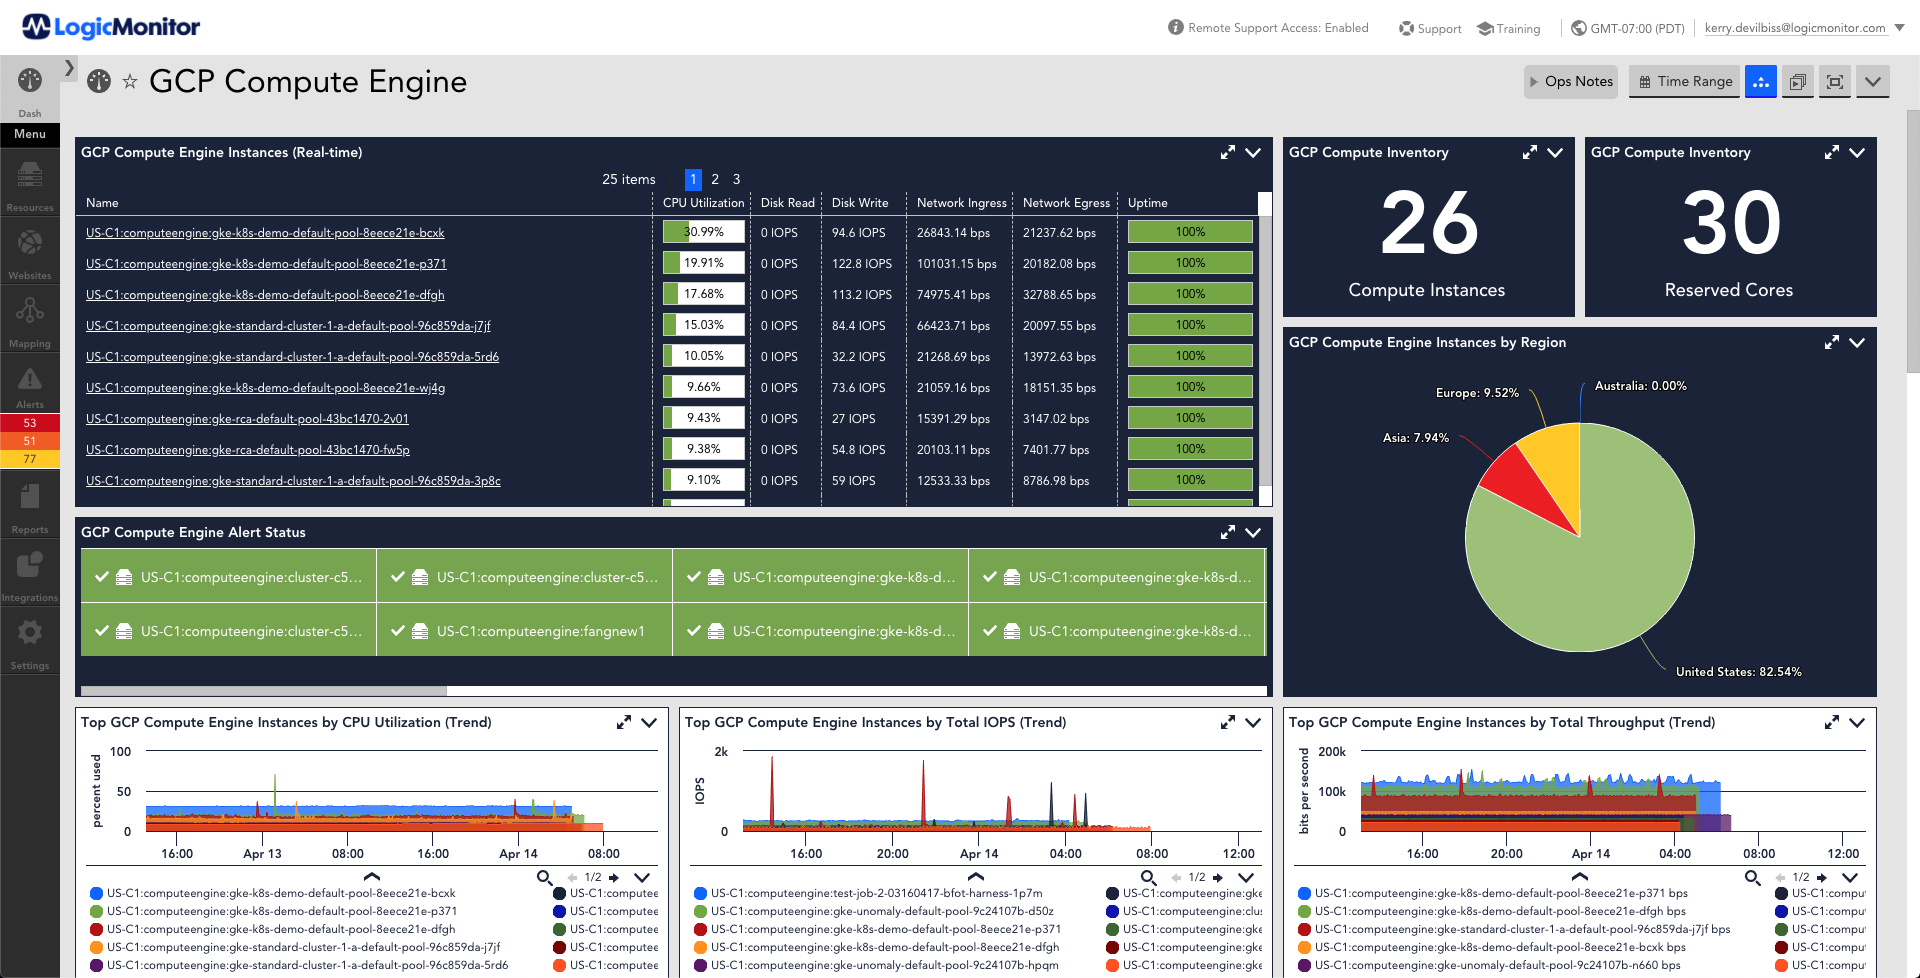 This dashboard provides an a listing of various metrics that are monitored for GCP Compute Engine. The metrics displayed are real-time statistics, status, computer instance, reserved cores, instance by region distribution, CPU utilization over time, total IOPS over time, total throughput over time.